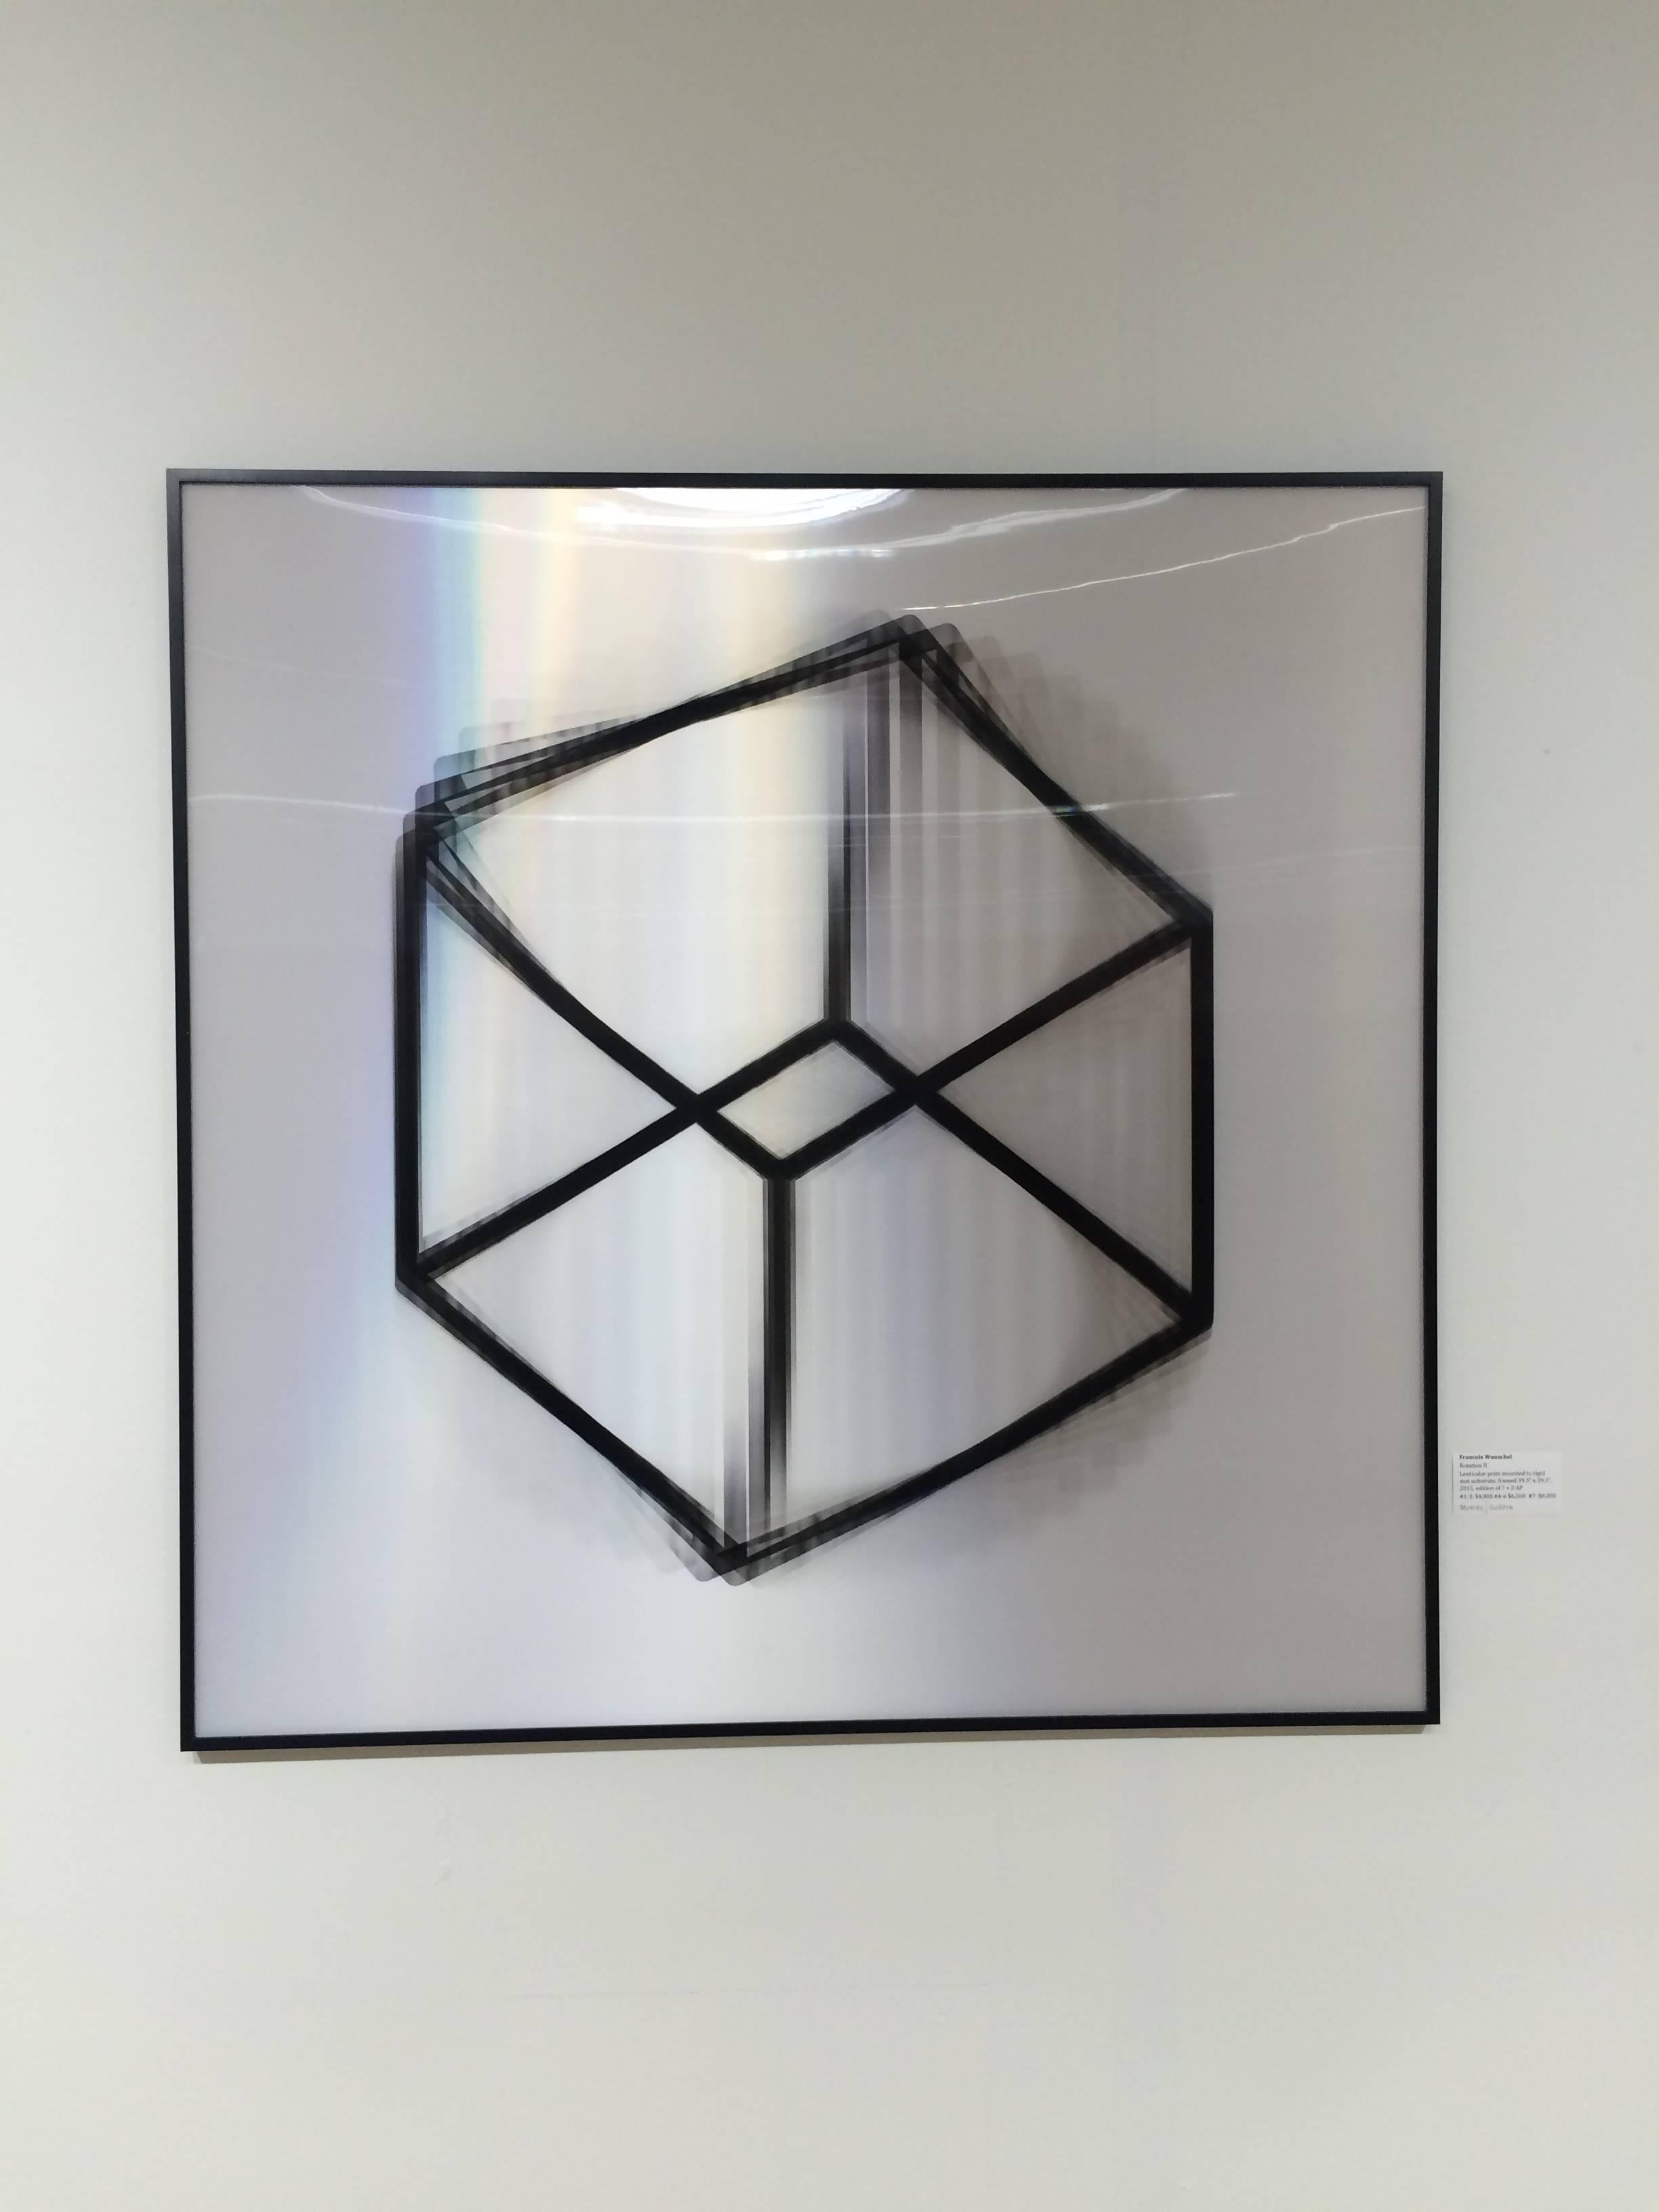 Rotation II- abstract geometric black and white lenticular print rotating cube